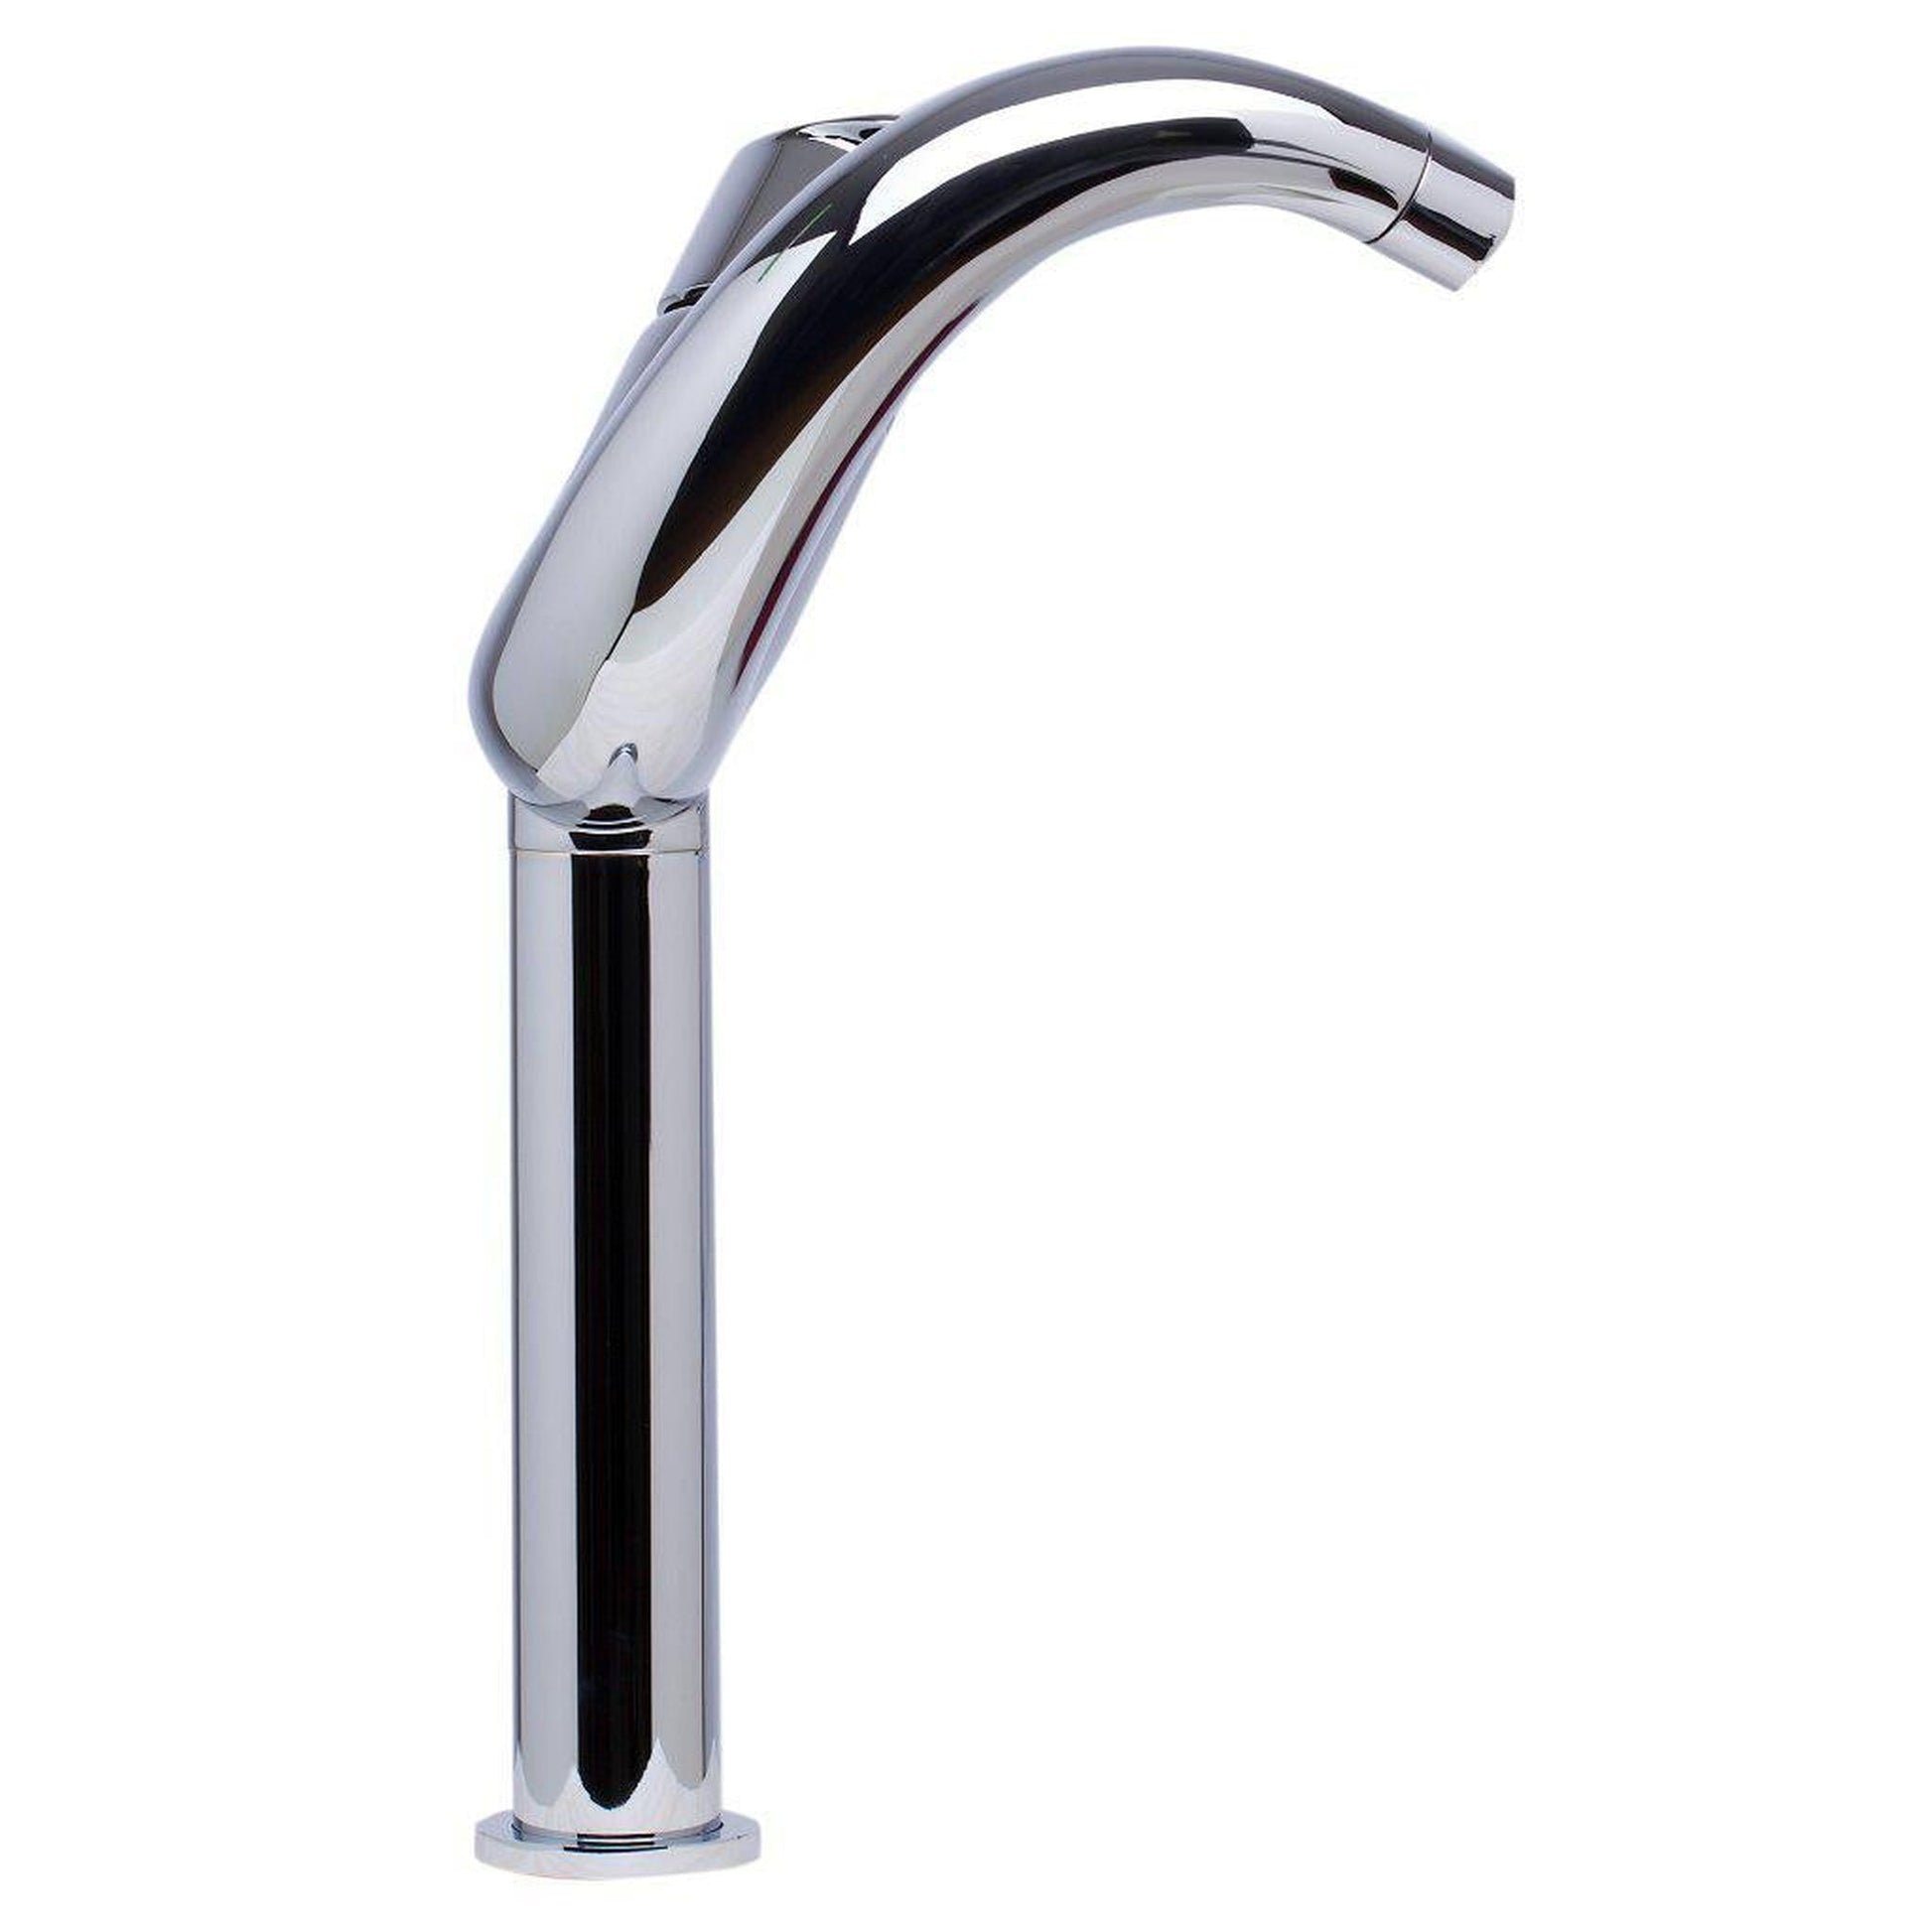 ALFI Brand AB1570-PC Polished Chrome Vessel Wave Spout Brass Bathroom Sink Faucet With Single Lever